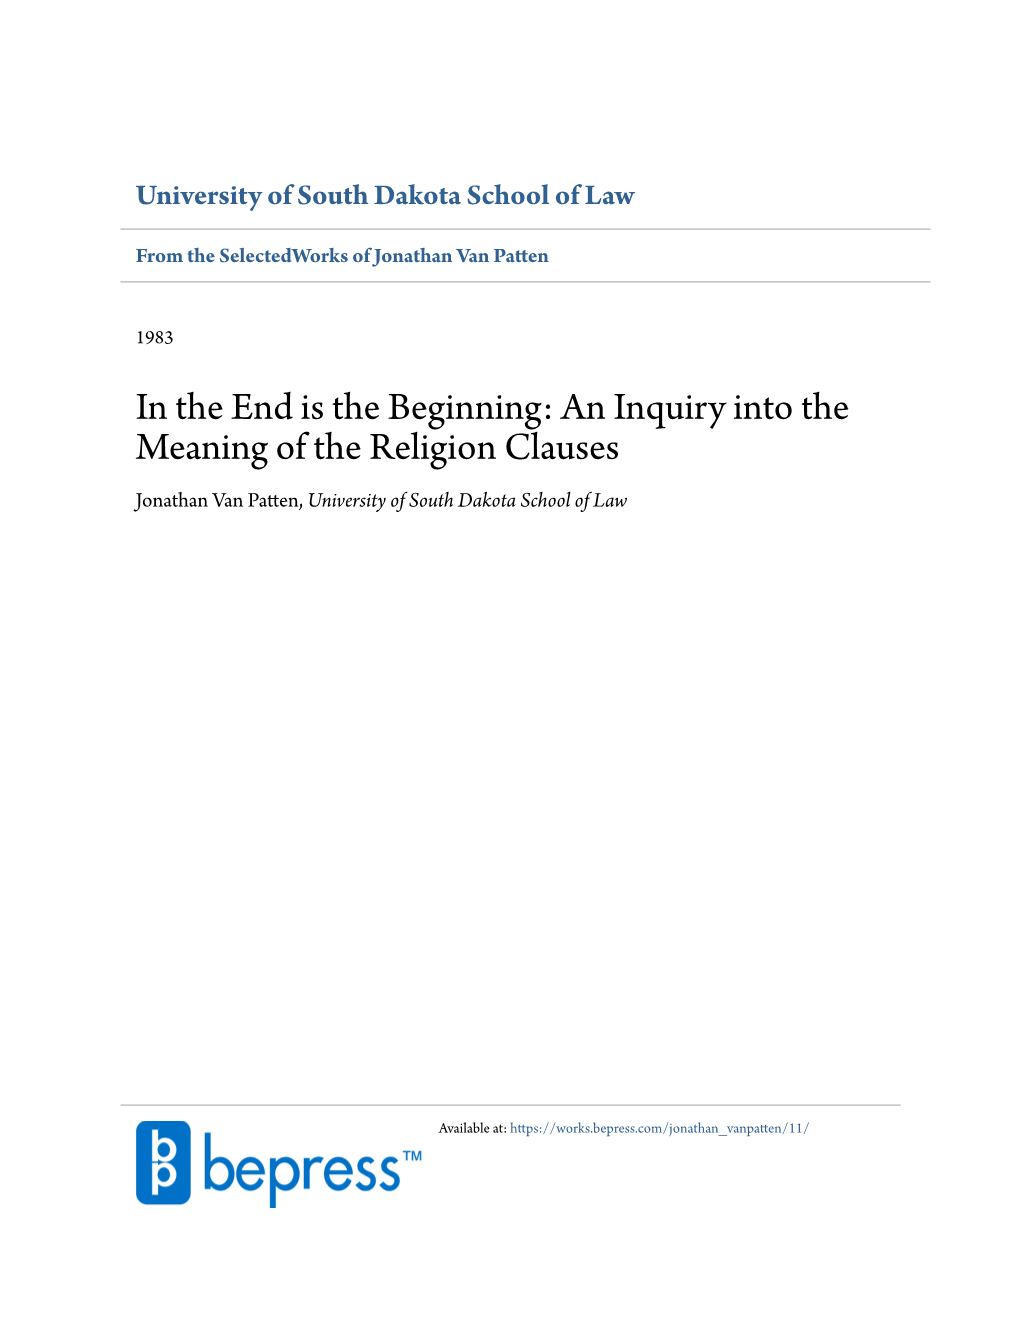 In the End Is the Beginning: an Inquiry Into the Meaning of the Religion Clauses Jonathan Van Patten, University of South Dakota School of Law